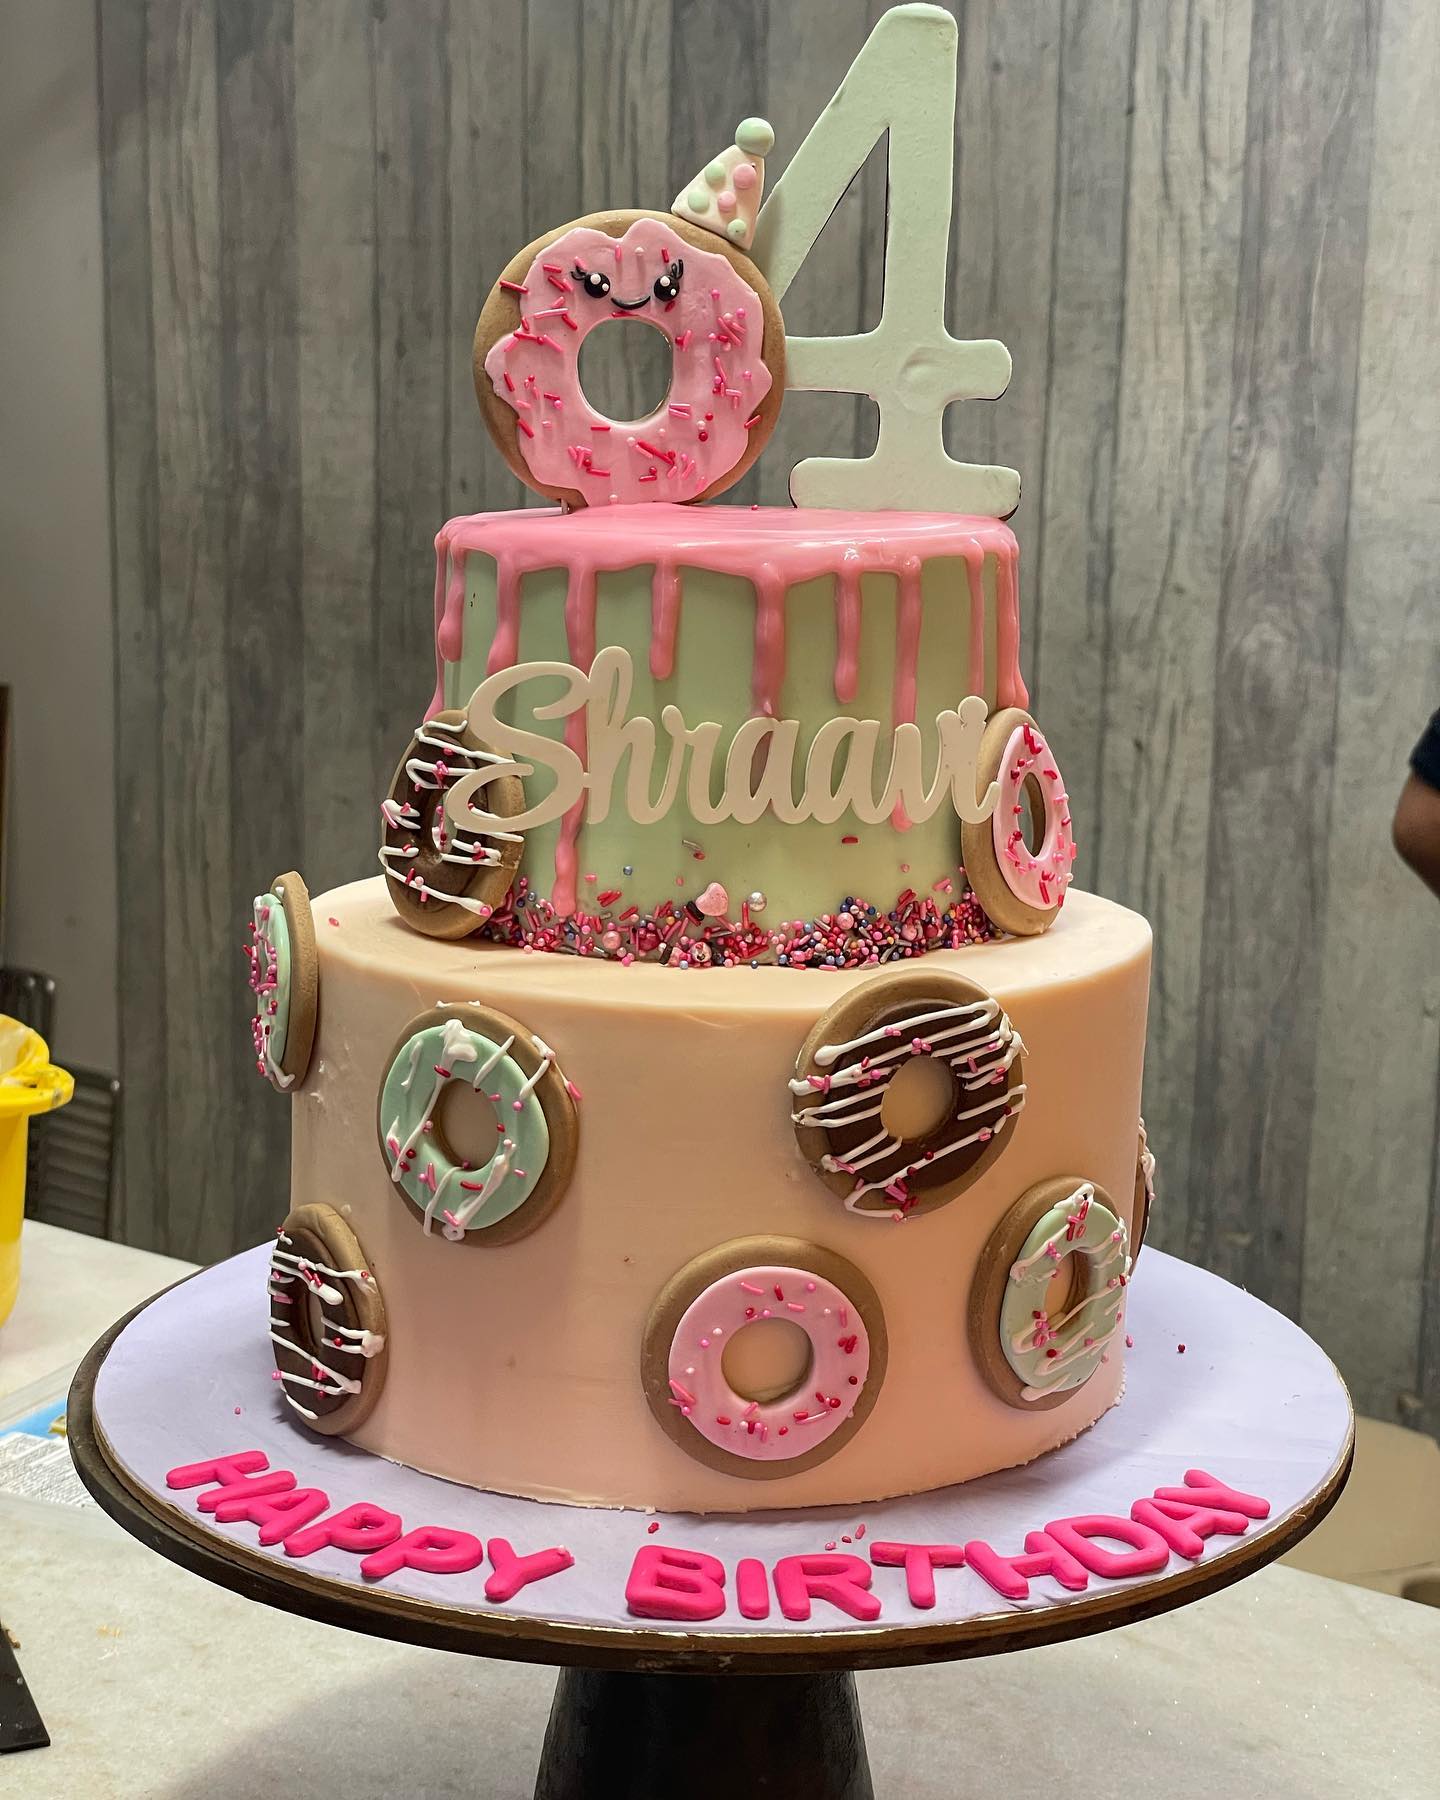 Birthday cakes for adults – Baked Beauties